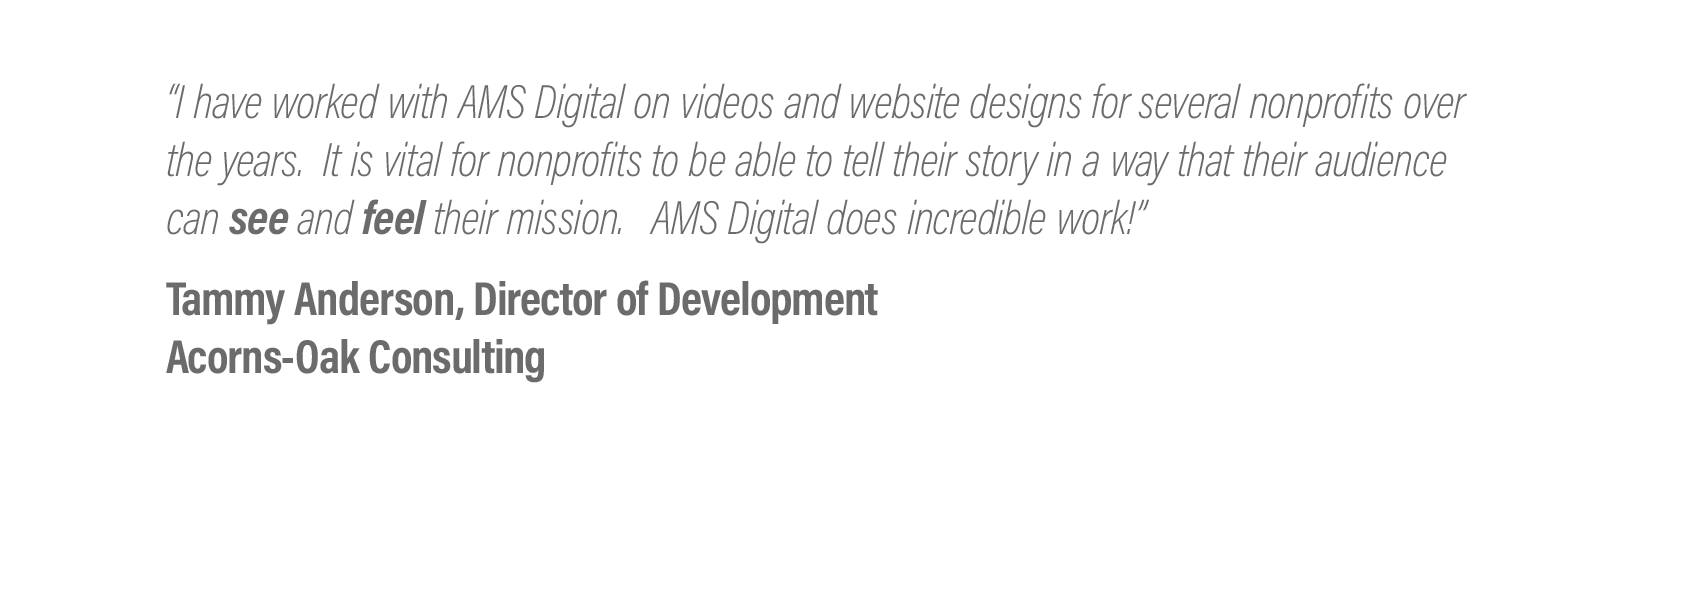   “I have worked with AMS Digital on videos and website designs for several nonprofits over the years.  It is vital for nonprofits to be able to tell their story in a way that their audience can    see    and    feel    their mission.   AMS Digital d